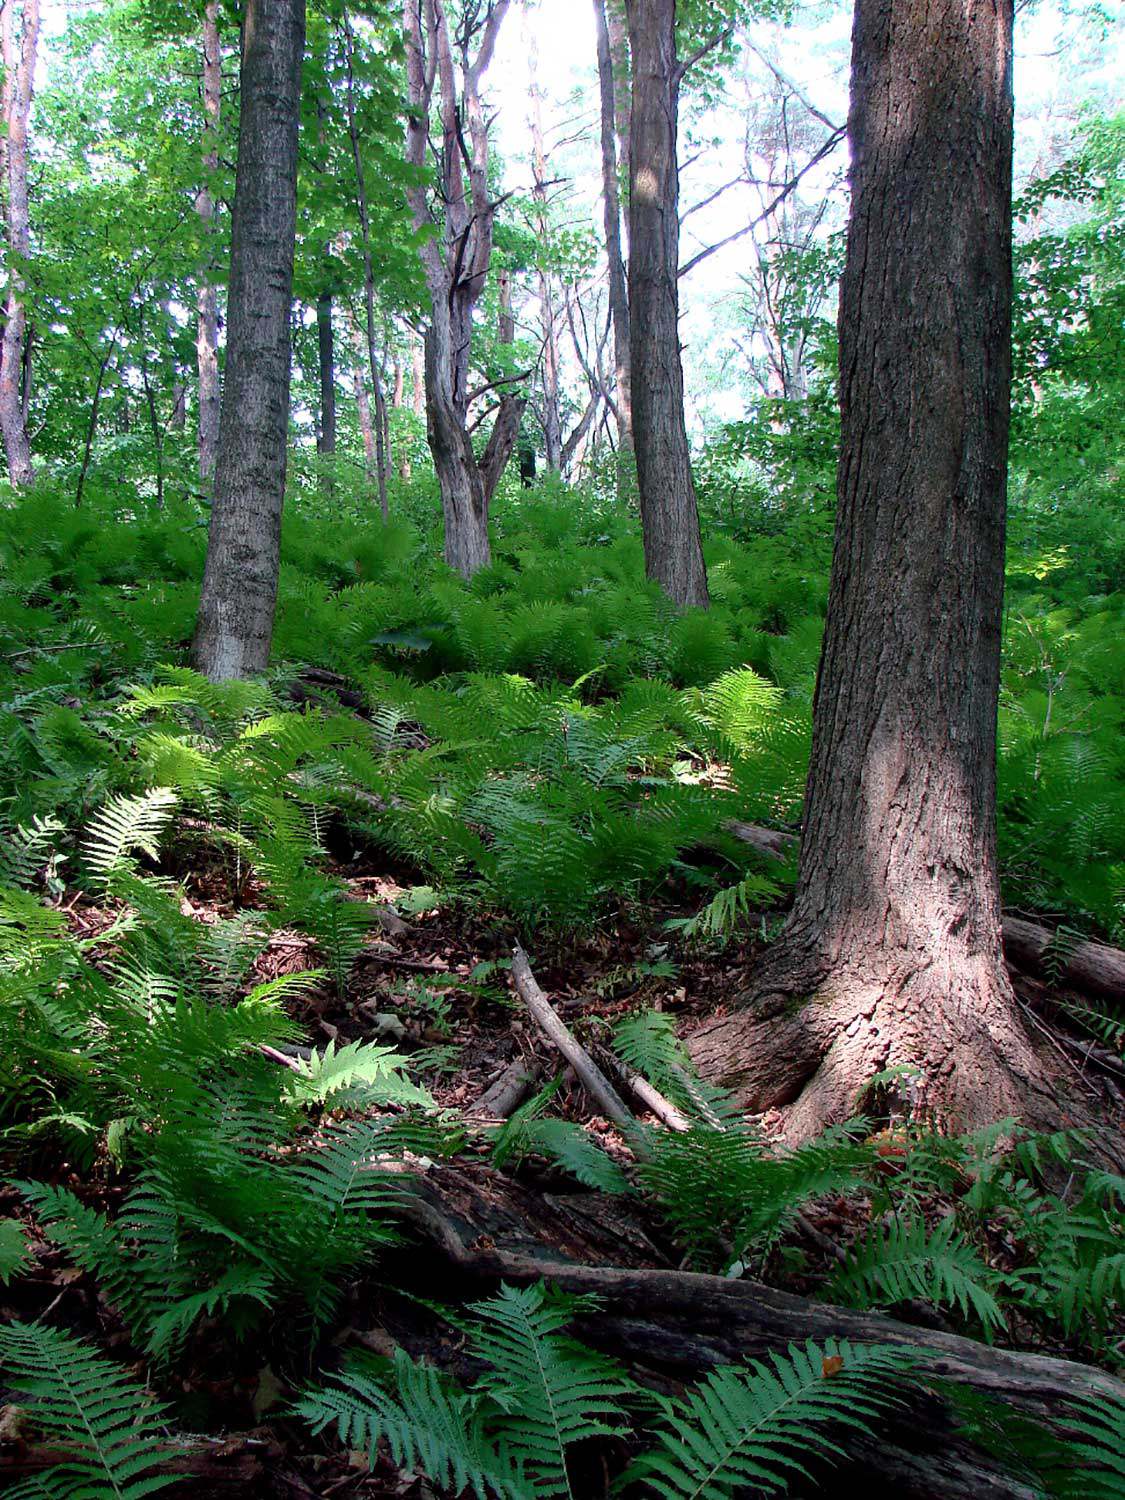 These ostrich ferns at Sheppard’s Bush Conservation Area in Aurora offer the public a glimpse of urban biodiversity.